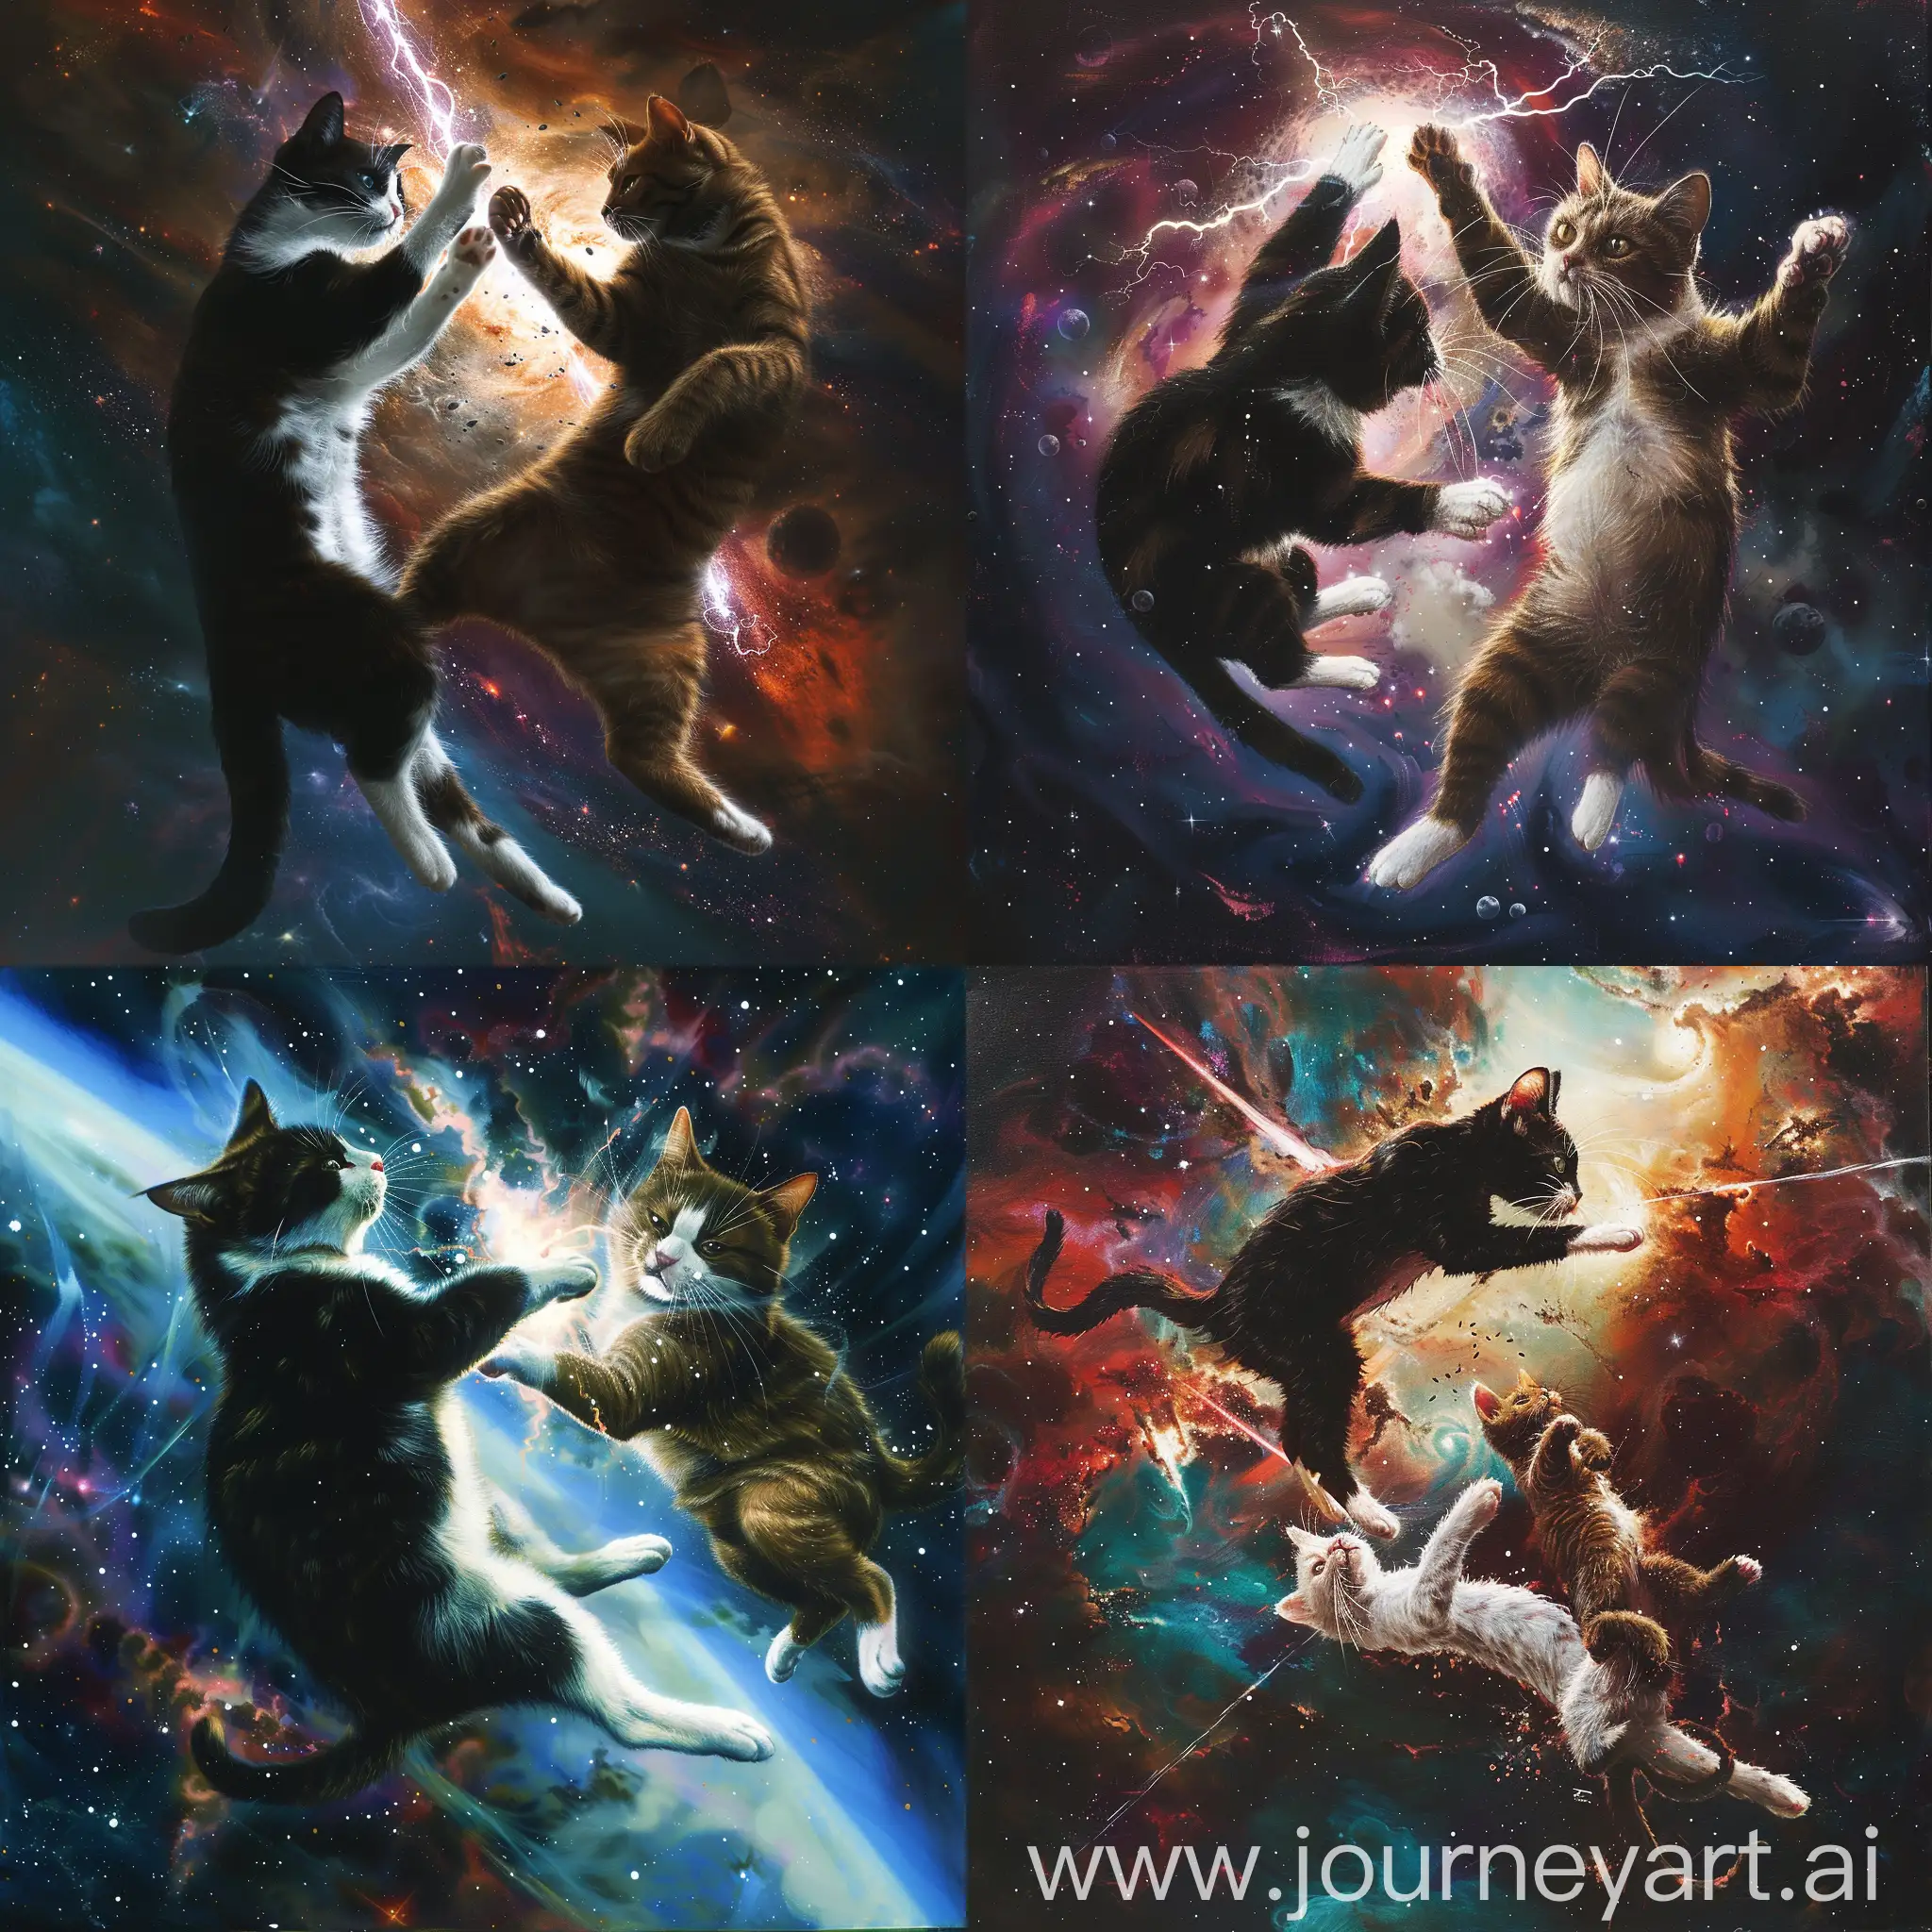 Realistic image. Fighting cat in space with superpowers. One cat is black-white another one is brown